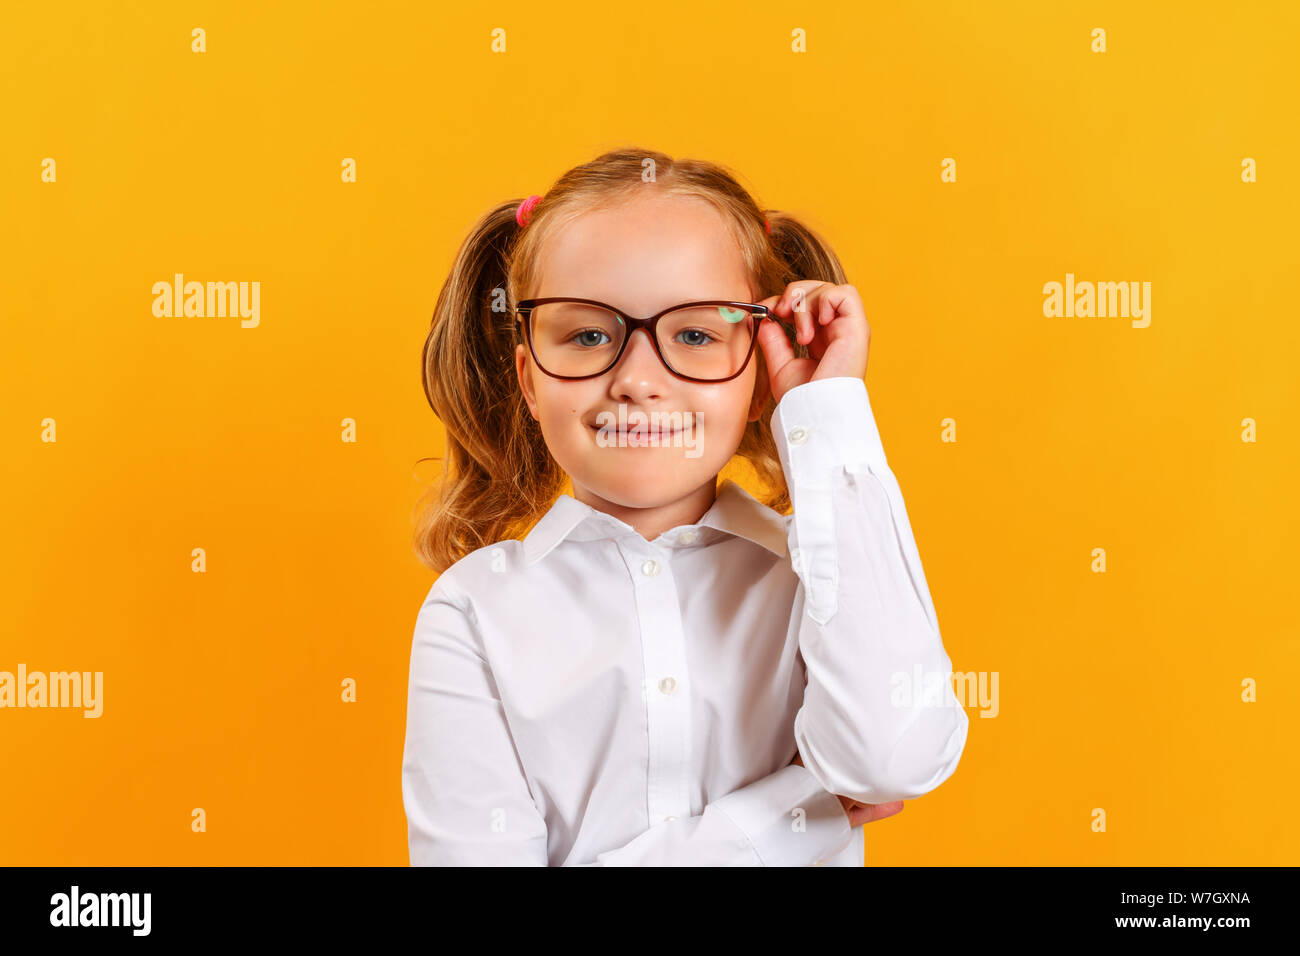 Portrait of a cute little girl on a yellow background. Child schoolgirl looks at the camera and adjusts his glasses. Education concept. Copy space. Stock Photo